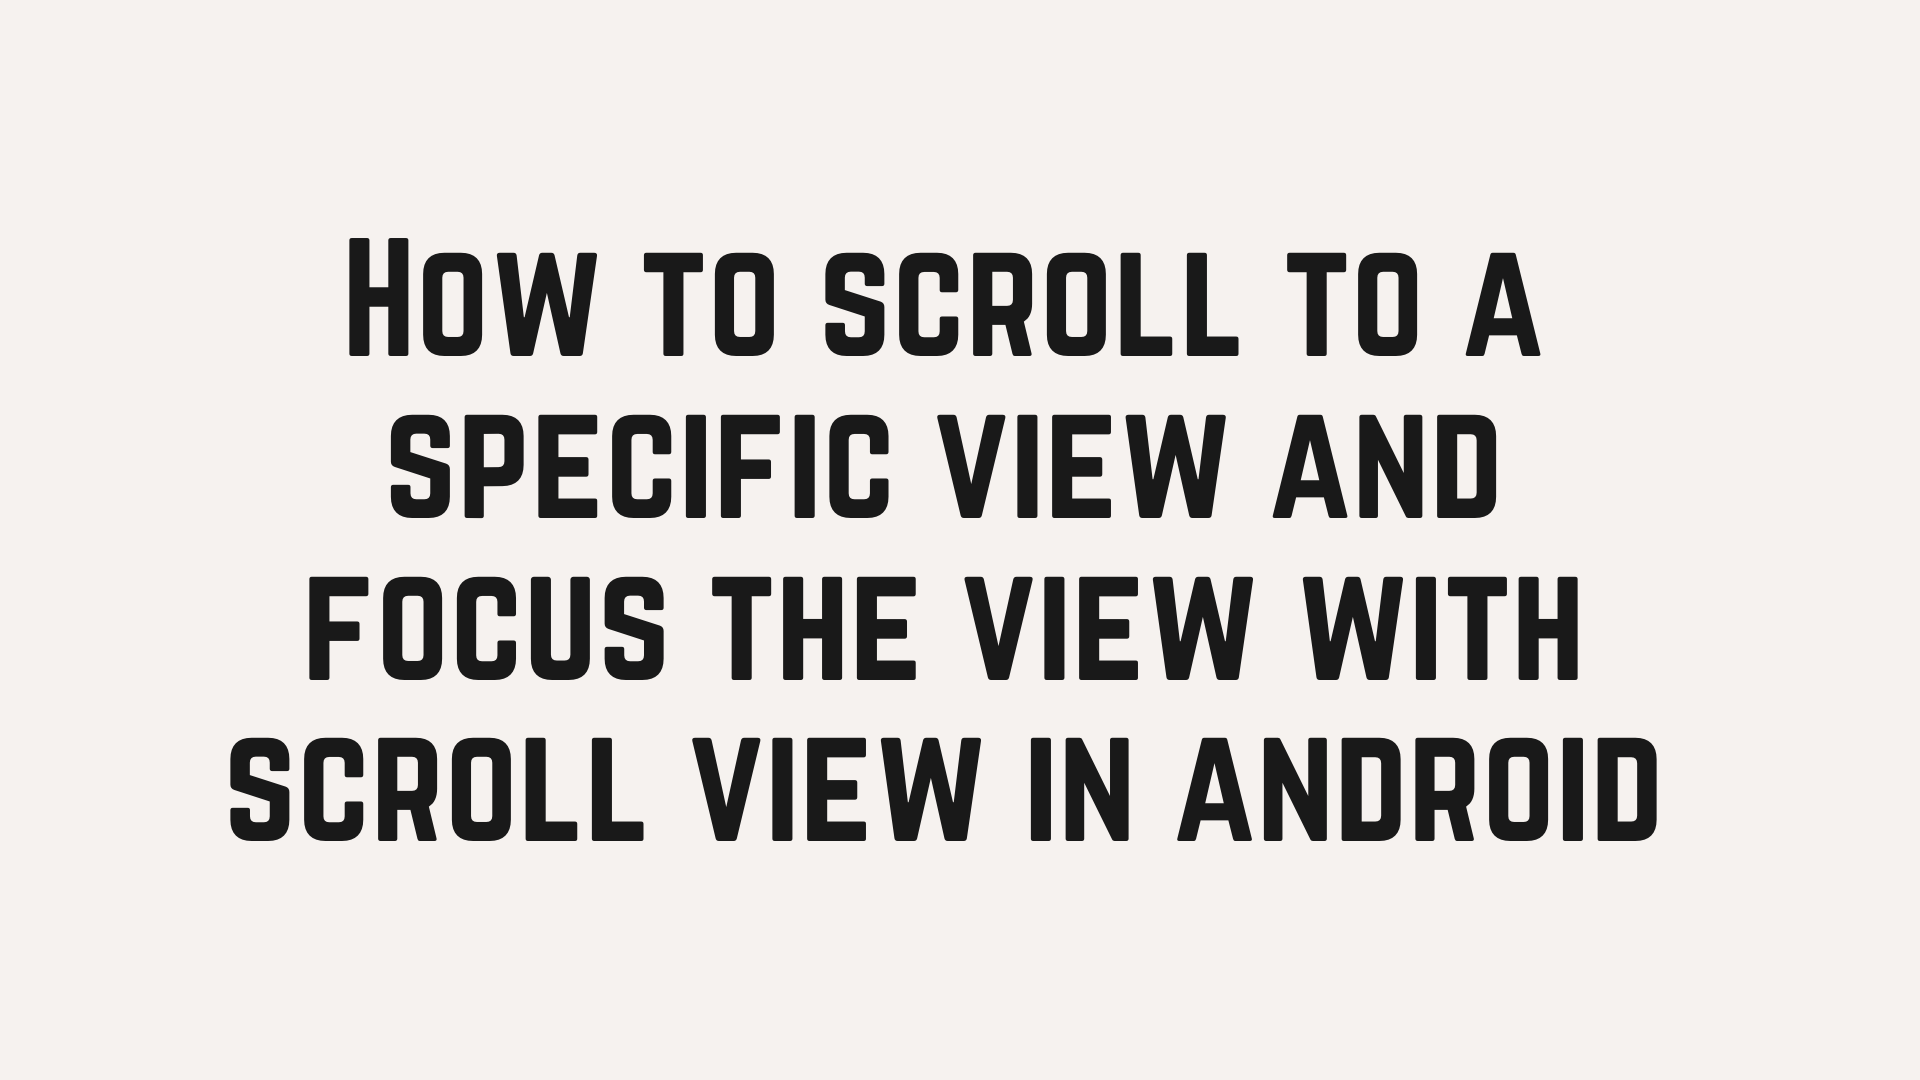 How to scroll to a specific view and focus the view with scroll view in android